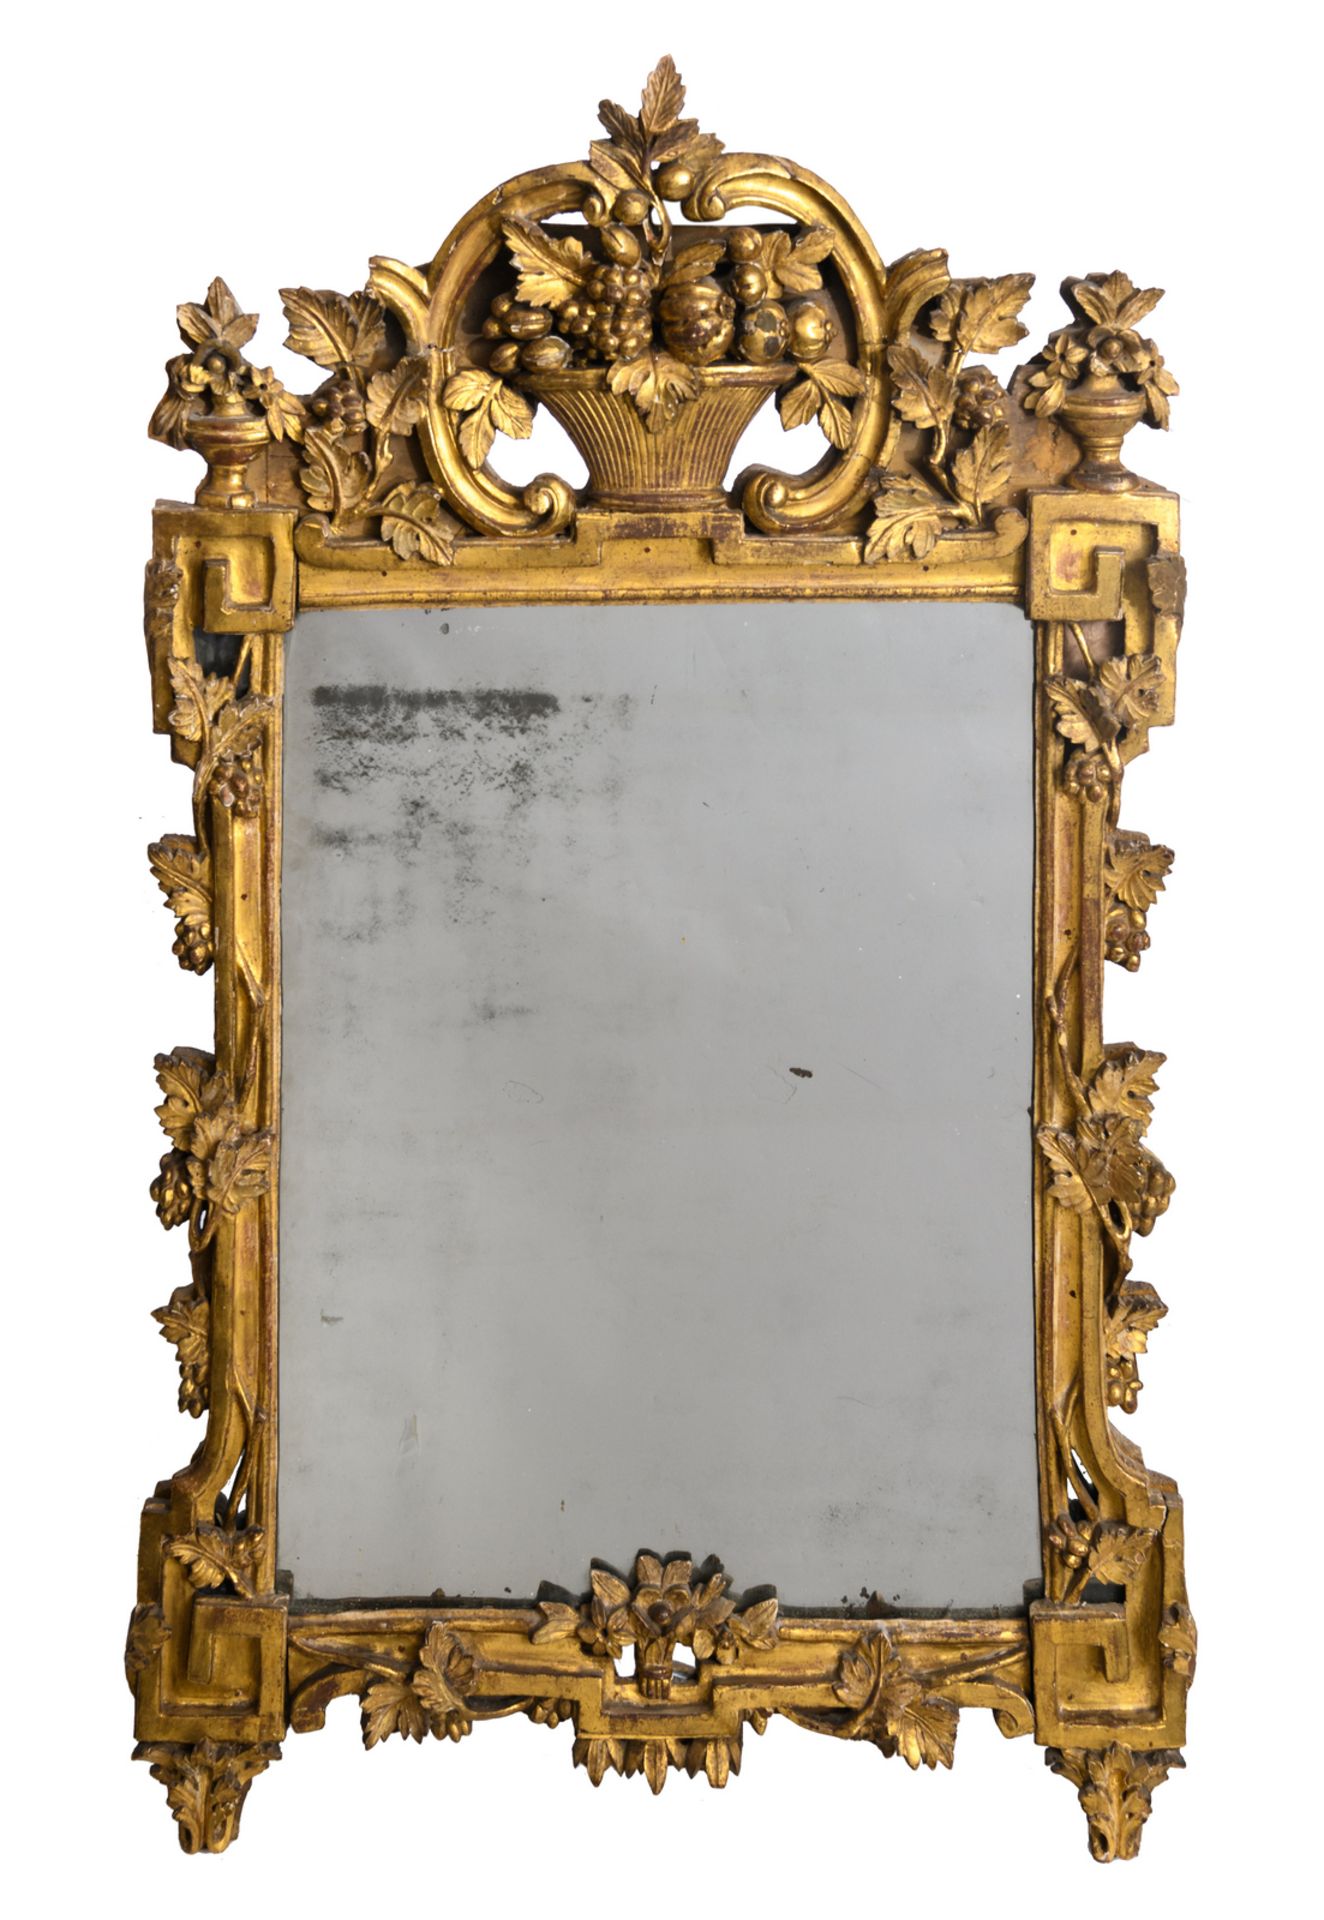 A mirror in a carved and gilt wooden Neoclassical 18thC frame, H 120,5 - W 73 cm